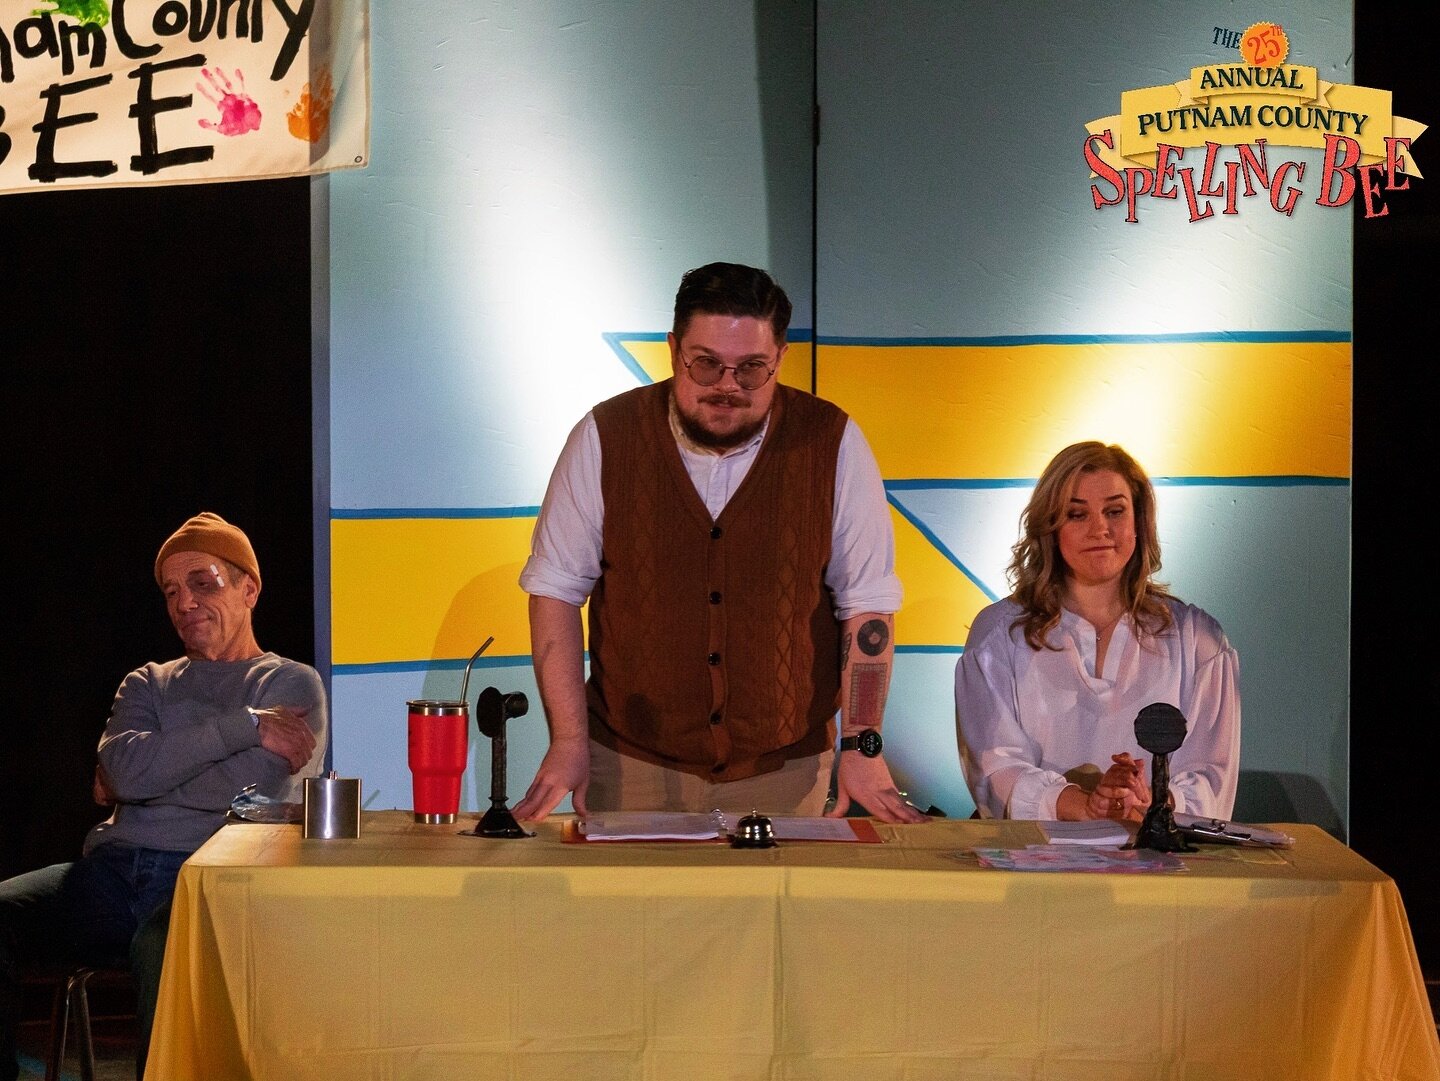 Don&rsquo;t make it awkward, get your tickets to the final performances of THE 25TH ANNUAL PUTNAM COUNTY SPELLING BEE now! Playing this Thursday and Saturday, you don&rsquo;t want to miss a hilarious and heartwarming evening of theatre and fun! 🛎️🎶